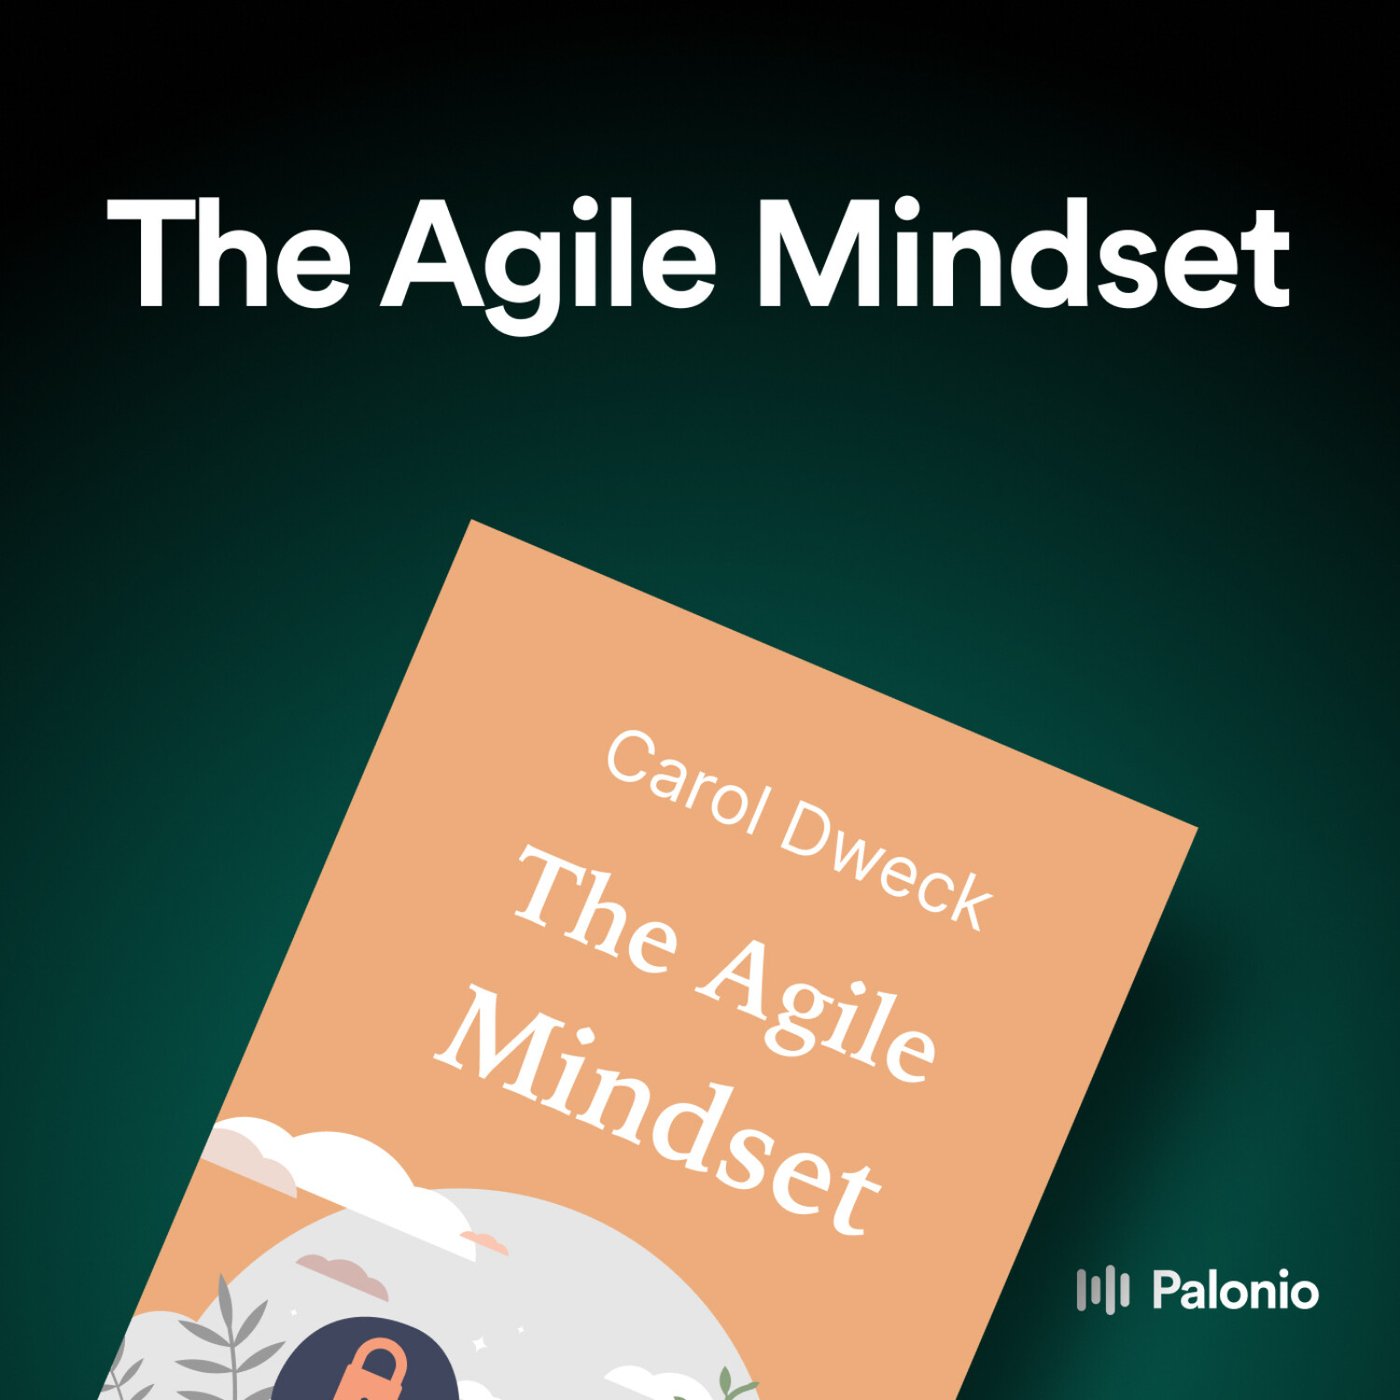 The Agile Mindset by Carol Dweck - One Business Book per Day